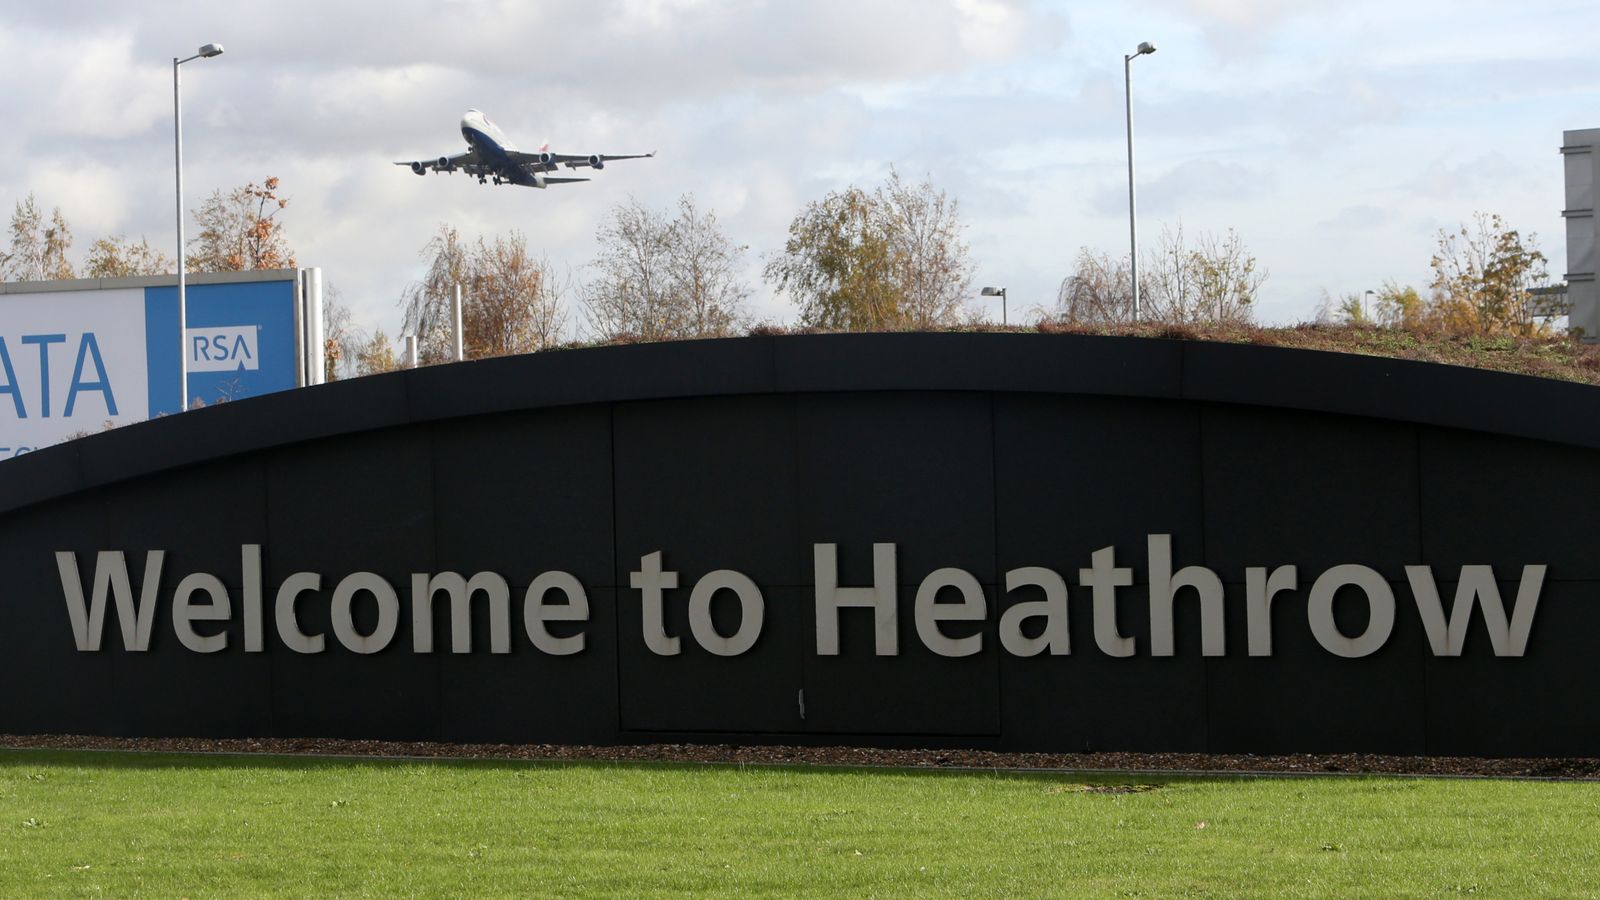 Murder suspect arrested at Heathrow Airport hours after man hit and killed by car